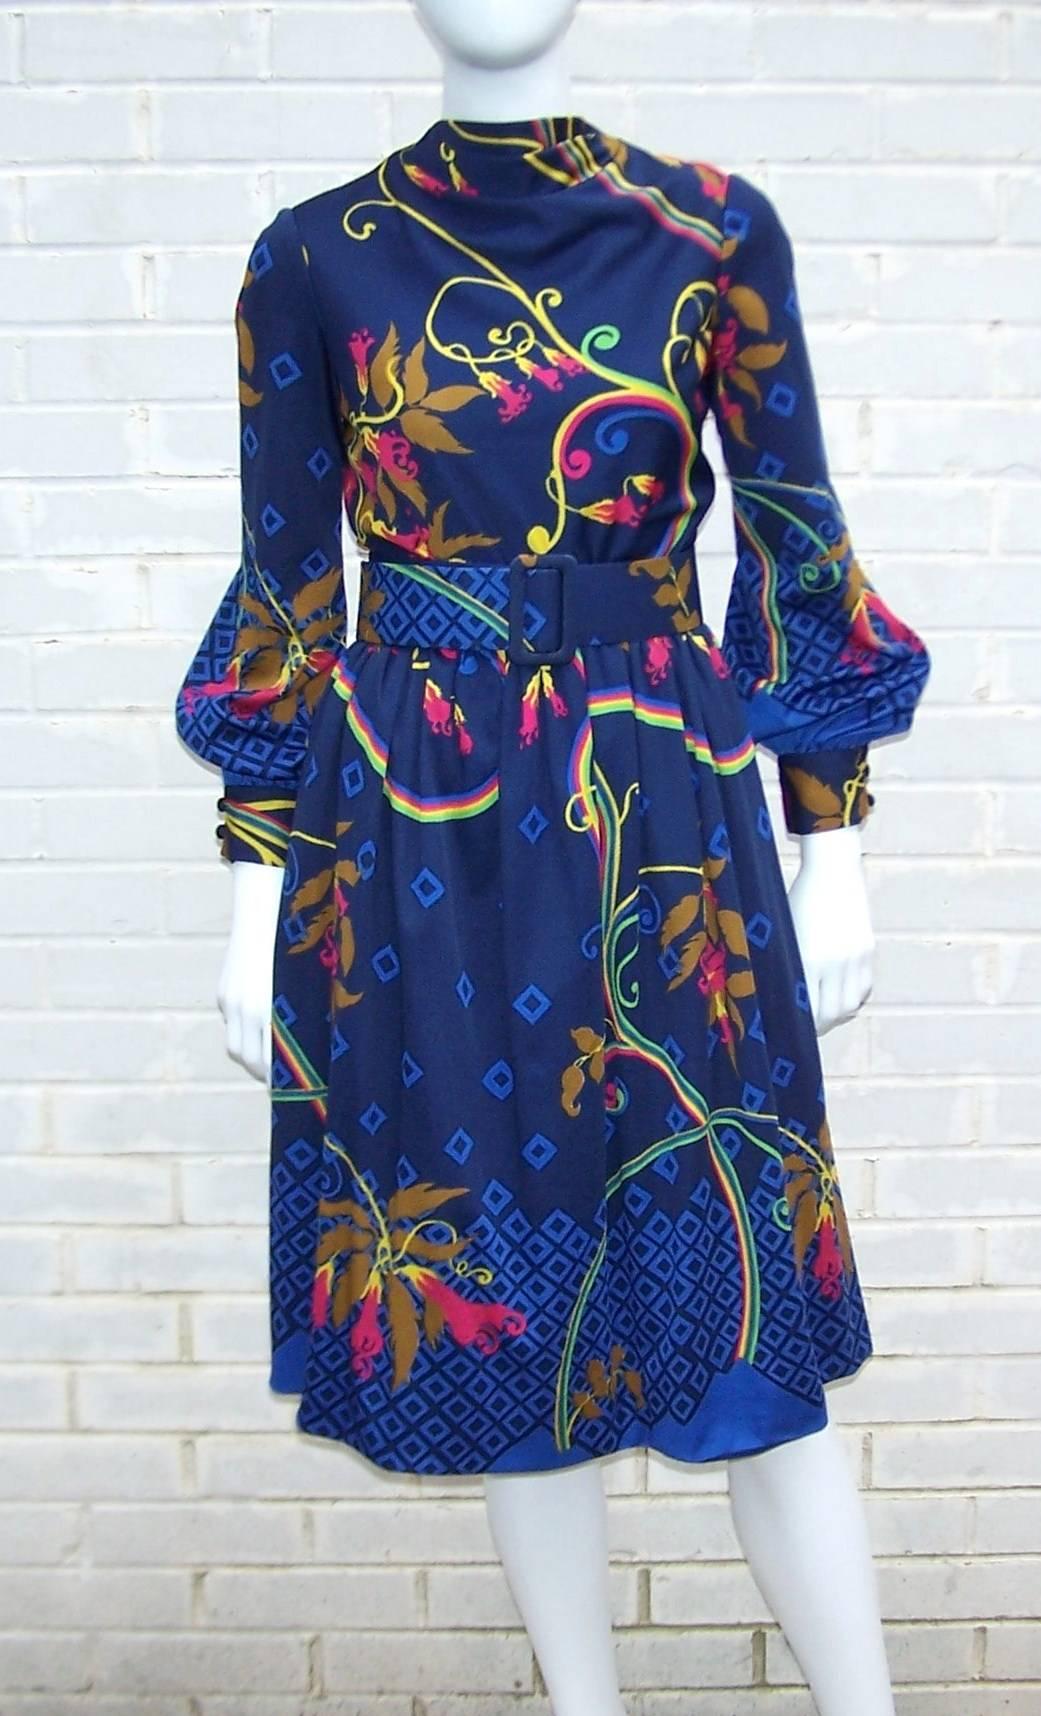 Teal Traina has updated an elegant ladylike silhouette with a mod abstract floral print in vibrant colors including blue, fuchsia, green, yellow and brown.  The fabric is a comfortable polyester jersey ... perfect for multi season wear and